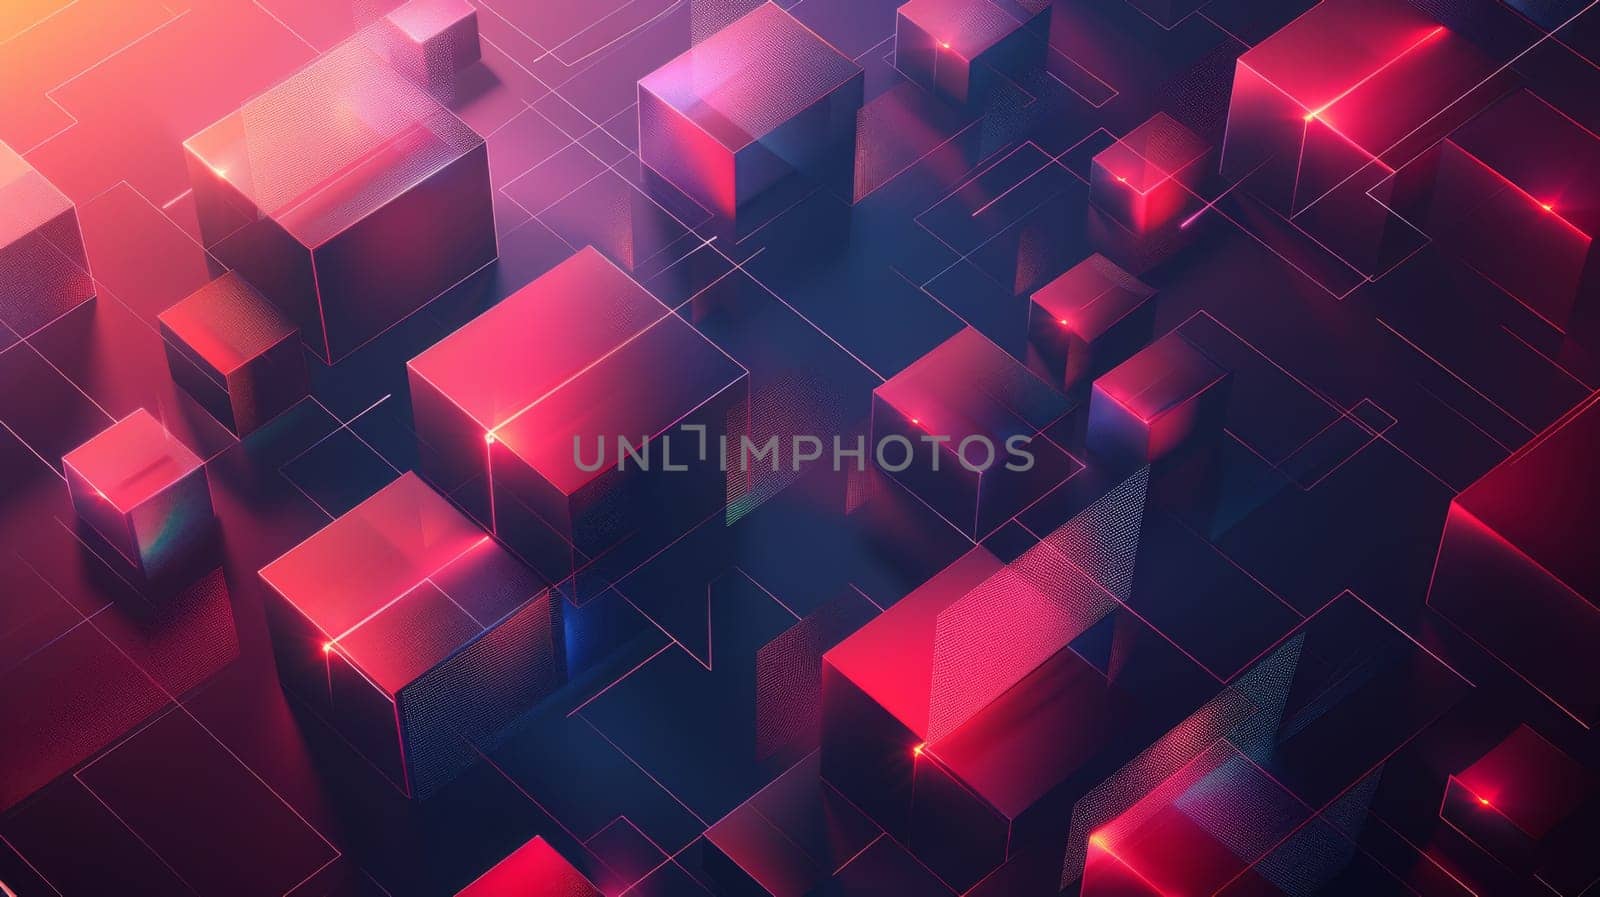 A colorful abstract background with red and blue cubes, AI by starush